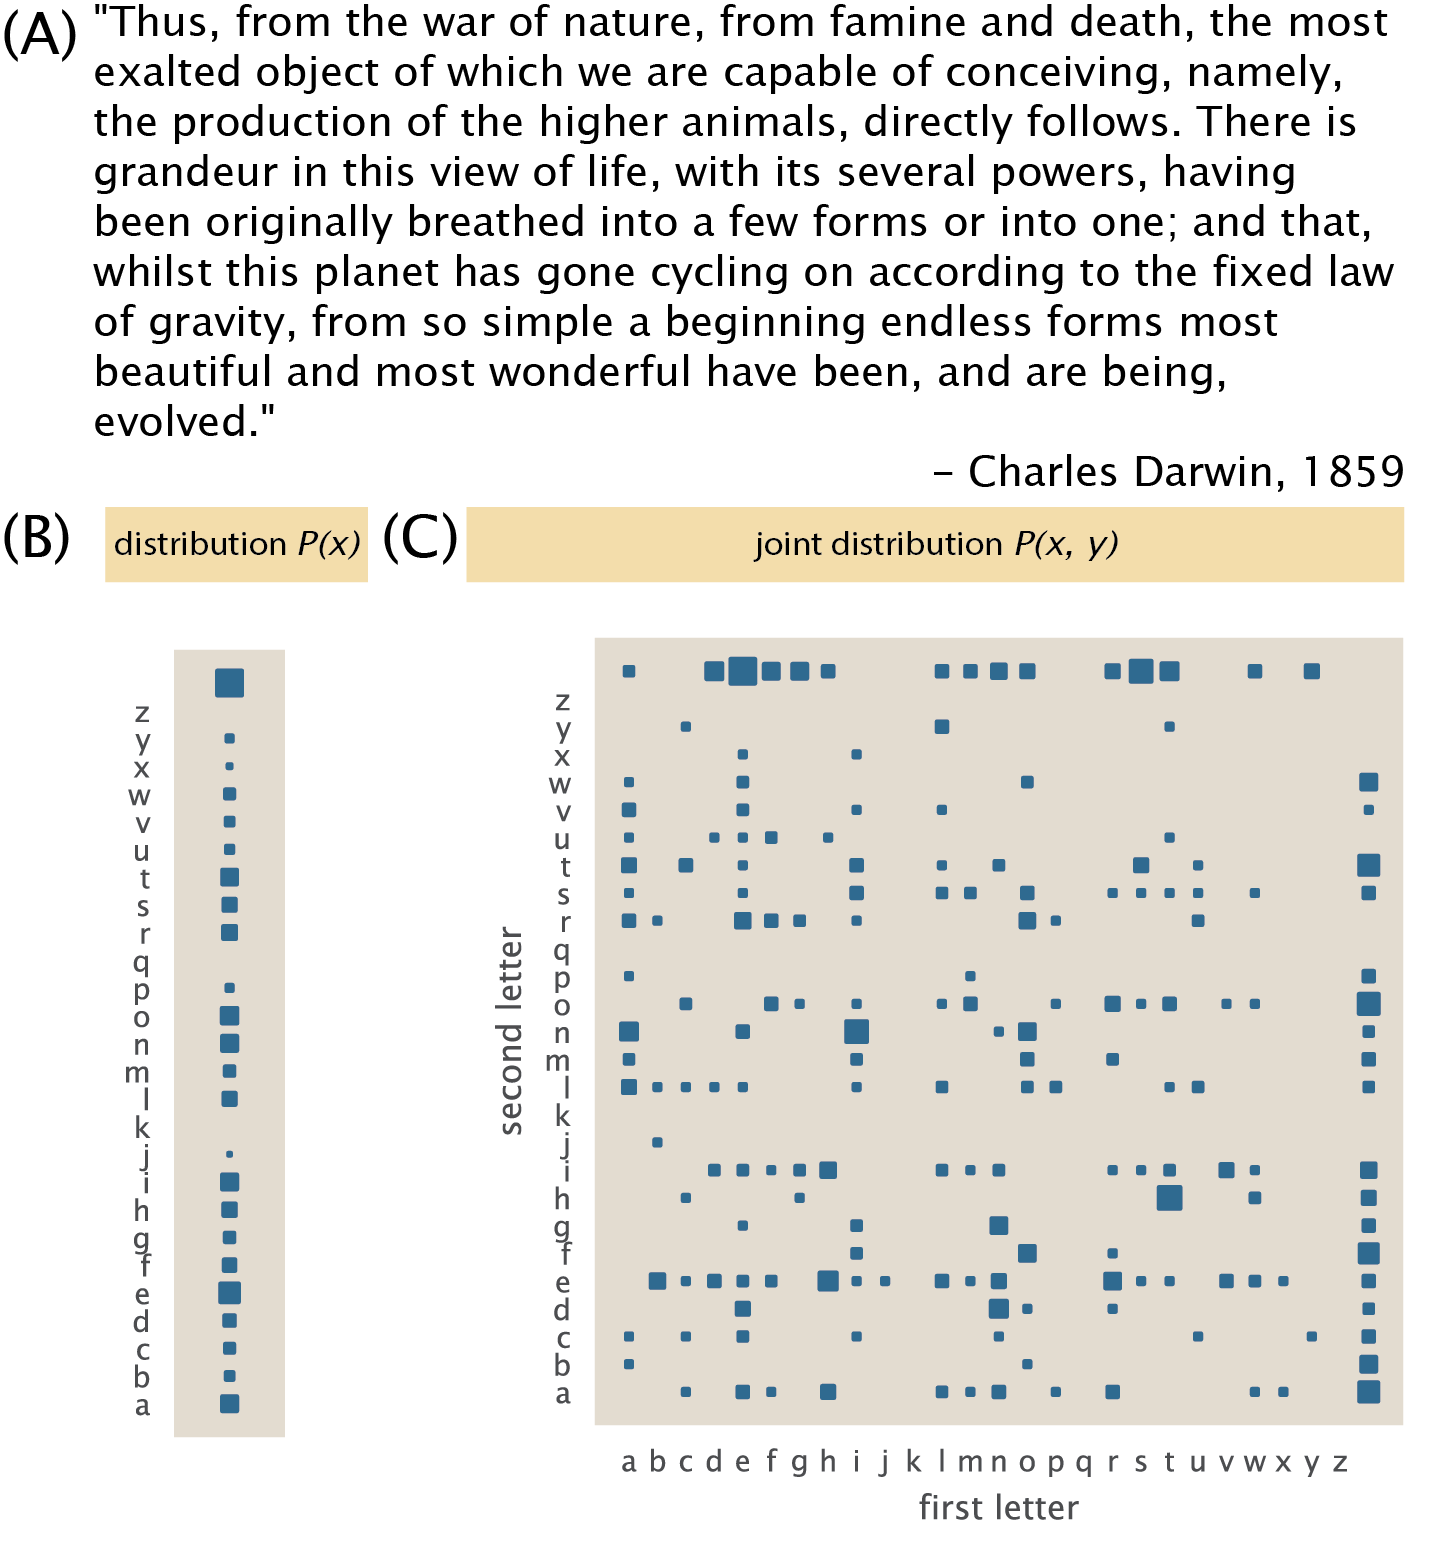 Figure 8: The statistical structure of the English language. (A) Last paragraph of On the Origin of Species by Charles Darwin. This serves as a rather nice not-random text example. (B) Marginal distribution P(x) of all 26 letters and space. The size of the squares is proportional to how often each letter appears in the paragraph. (C) Joint distribution of pairs of characters P(x, y). All pairs of characters in (A) were counted to build this histogram. The x-axis shows the first letter while the y-axis shows the second. For simplicity in (B) and (C) all punctuation was ignored. The Python code (ch1_fig08.py) used to generate this figure can be found on the thesis GitHub repository.